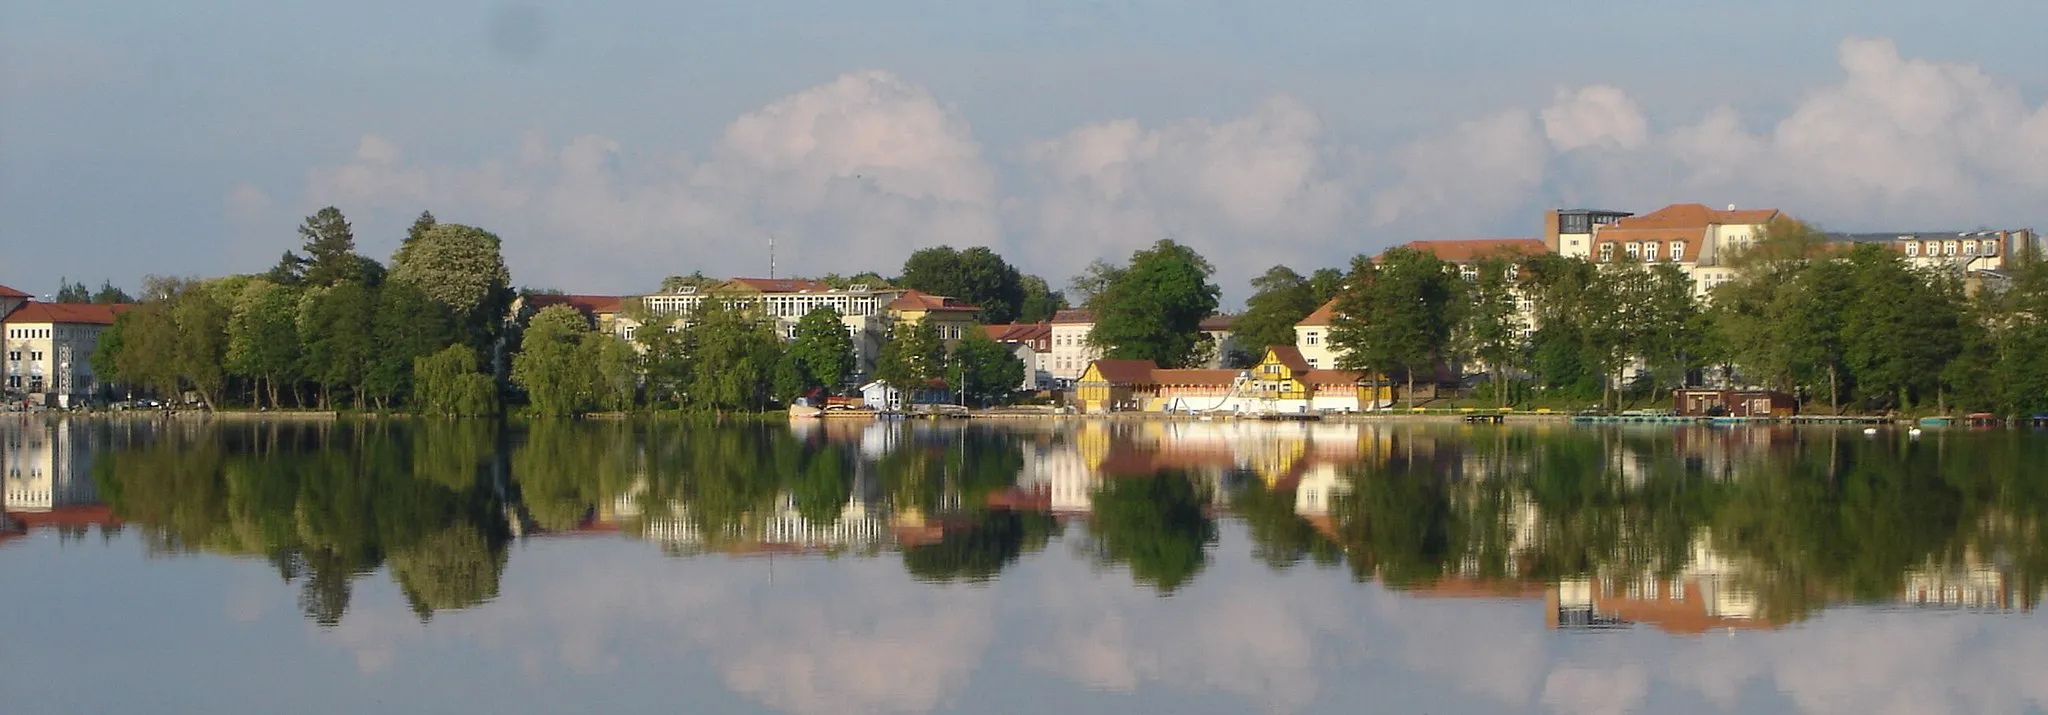 Photo showing: Panorama of Strausberg old town by lake Straussee